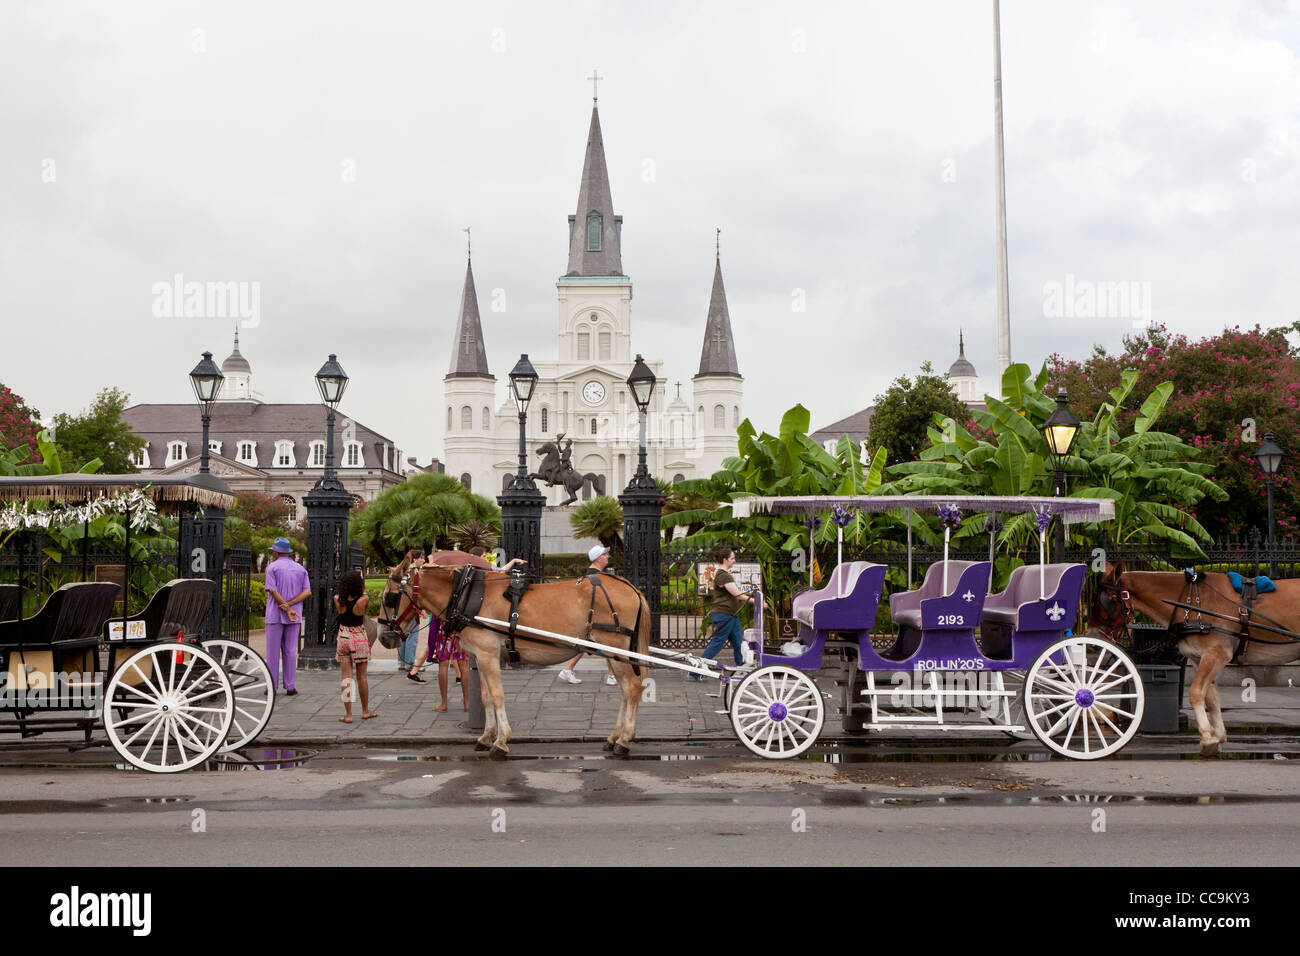 Horse and carriage vendors line up on Decatur Street in front of Jackson Square in the French Quarter of New Orleans, LA Stock Photo